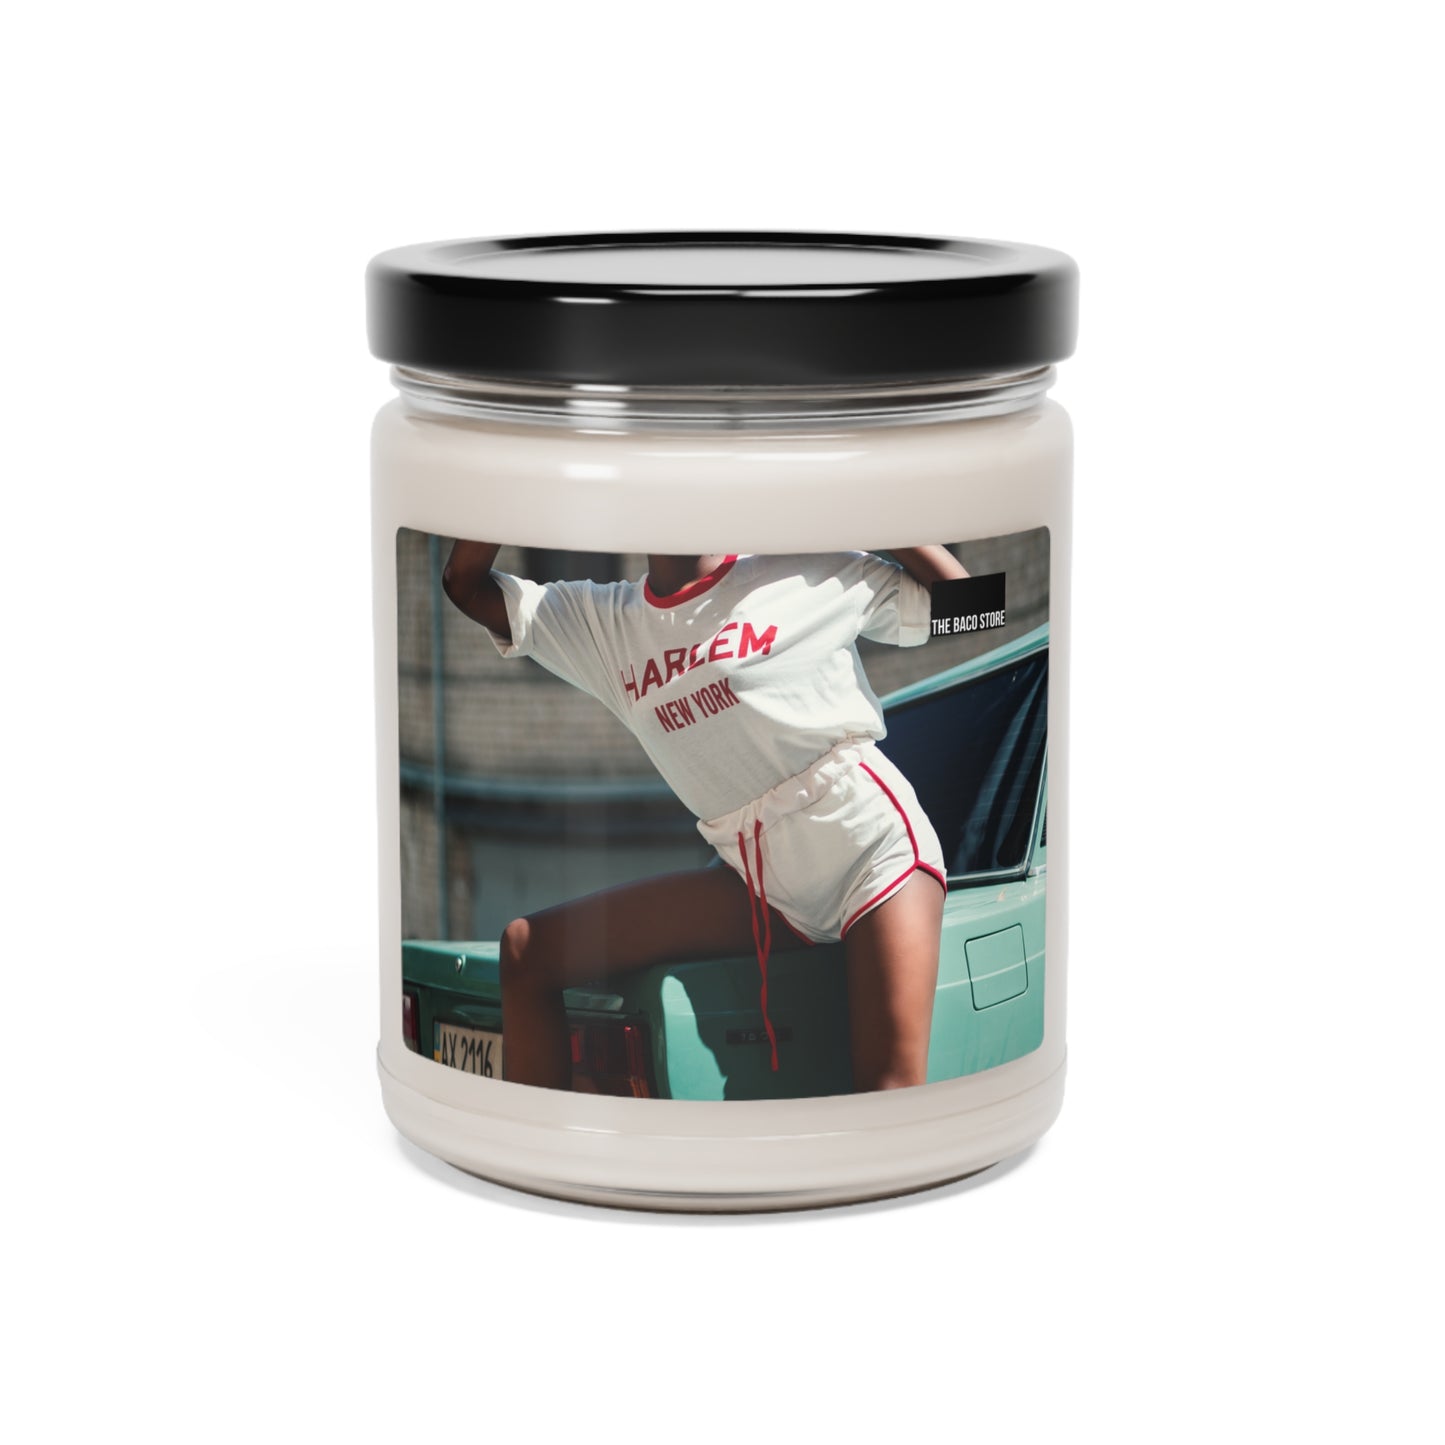 Harlem Vibe Scented Candle